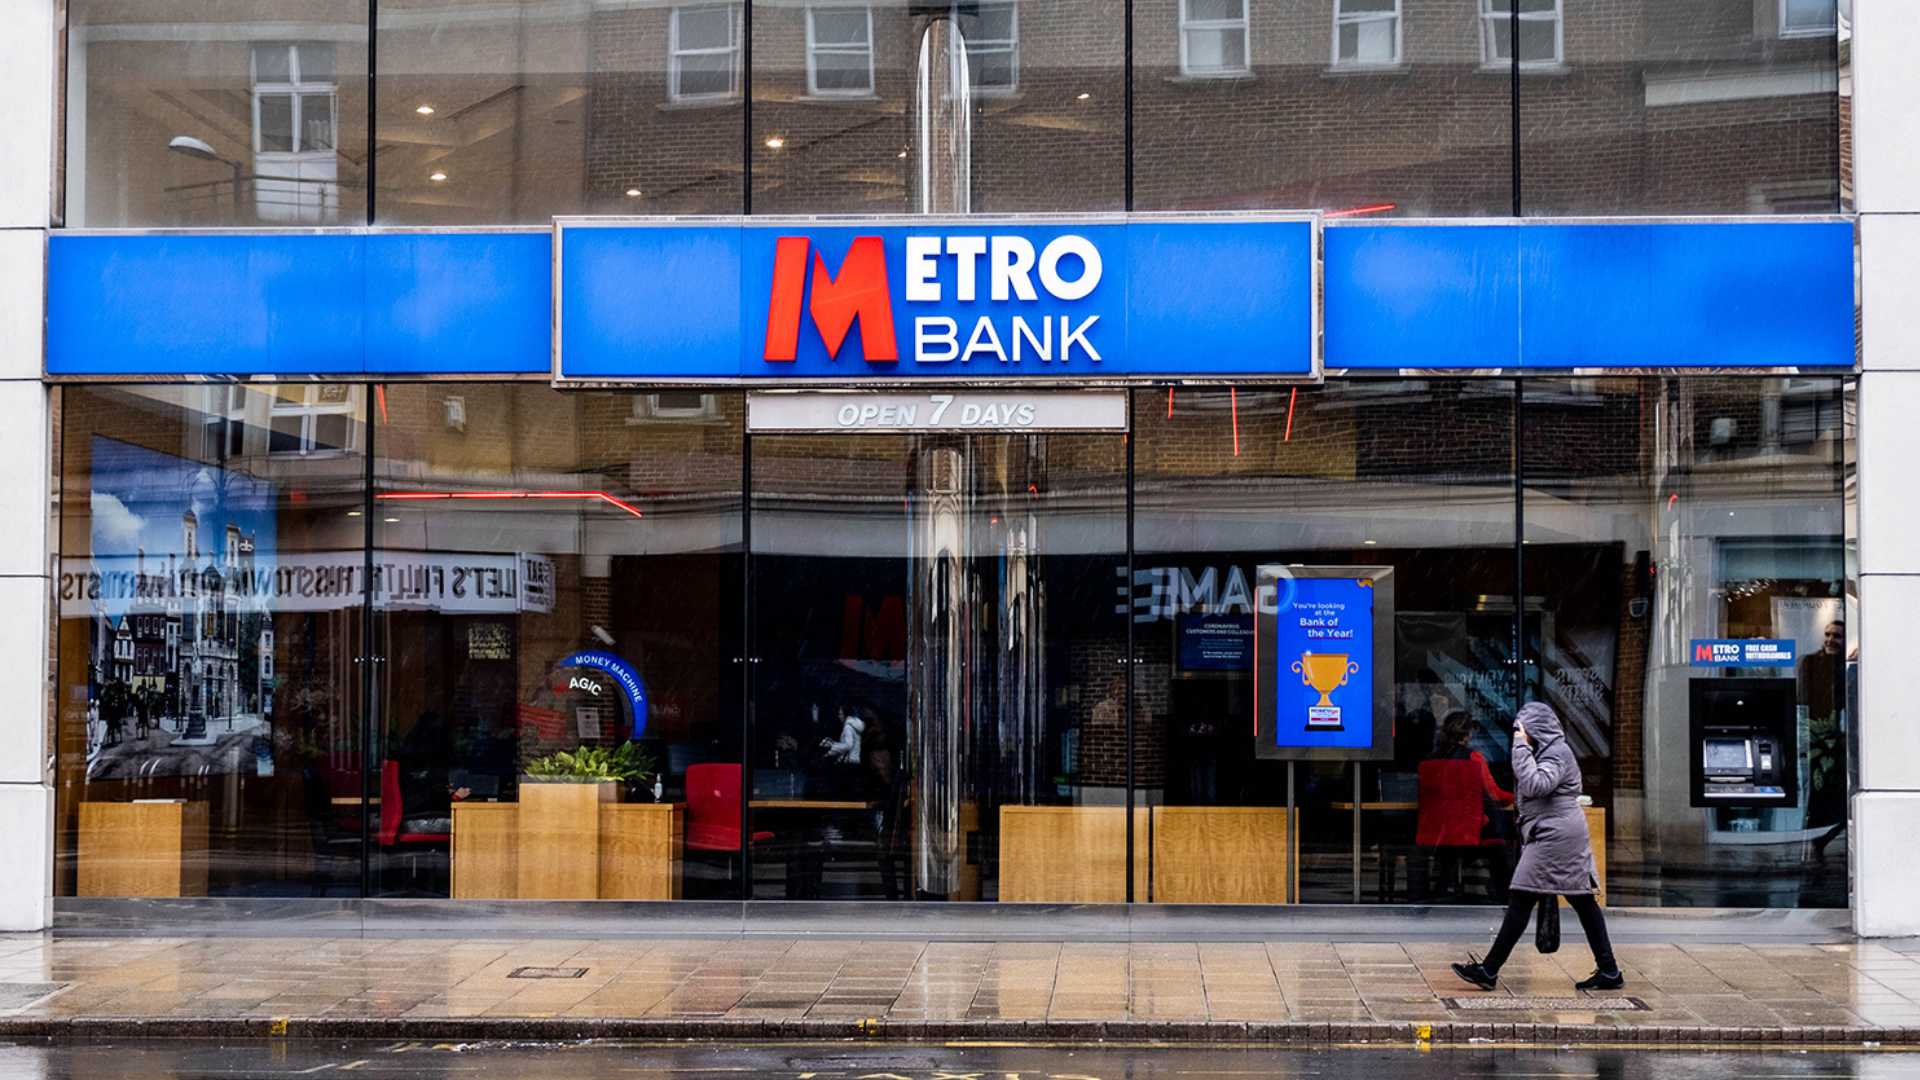 Rainy day fund: Metro Bank says despite digital services people still want to visit a branch Photo: Richard M Lee/Shutterstock